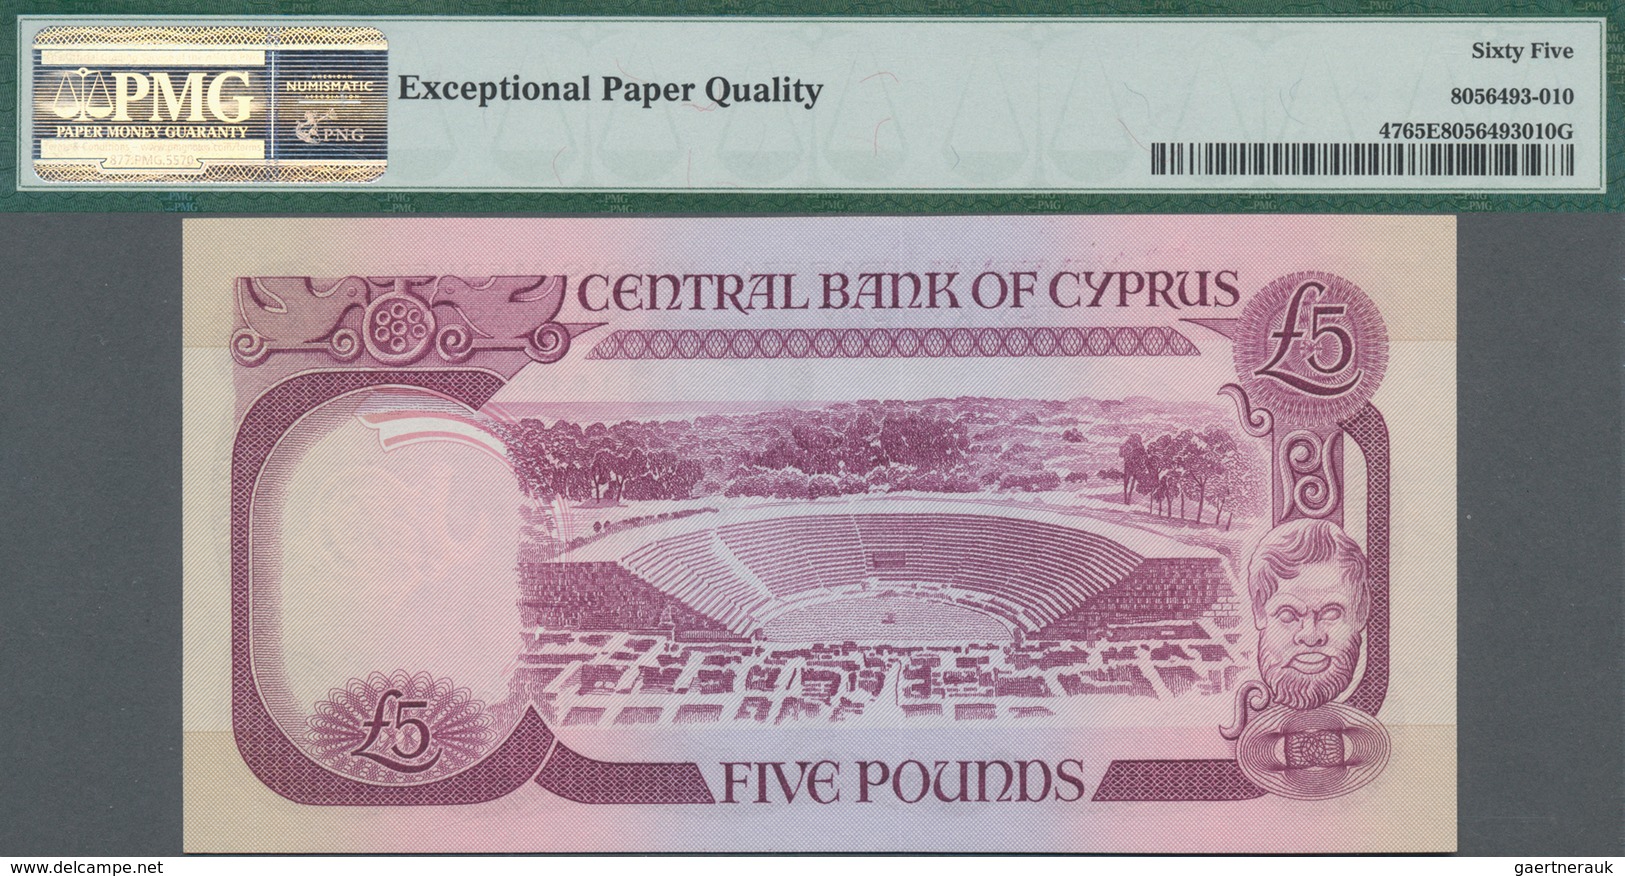 Cyprus / Zypern: Central Bank of Cyprus, set with 4 banknotes comprising 500 Mils 1979 P.42c PMG 66